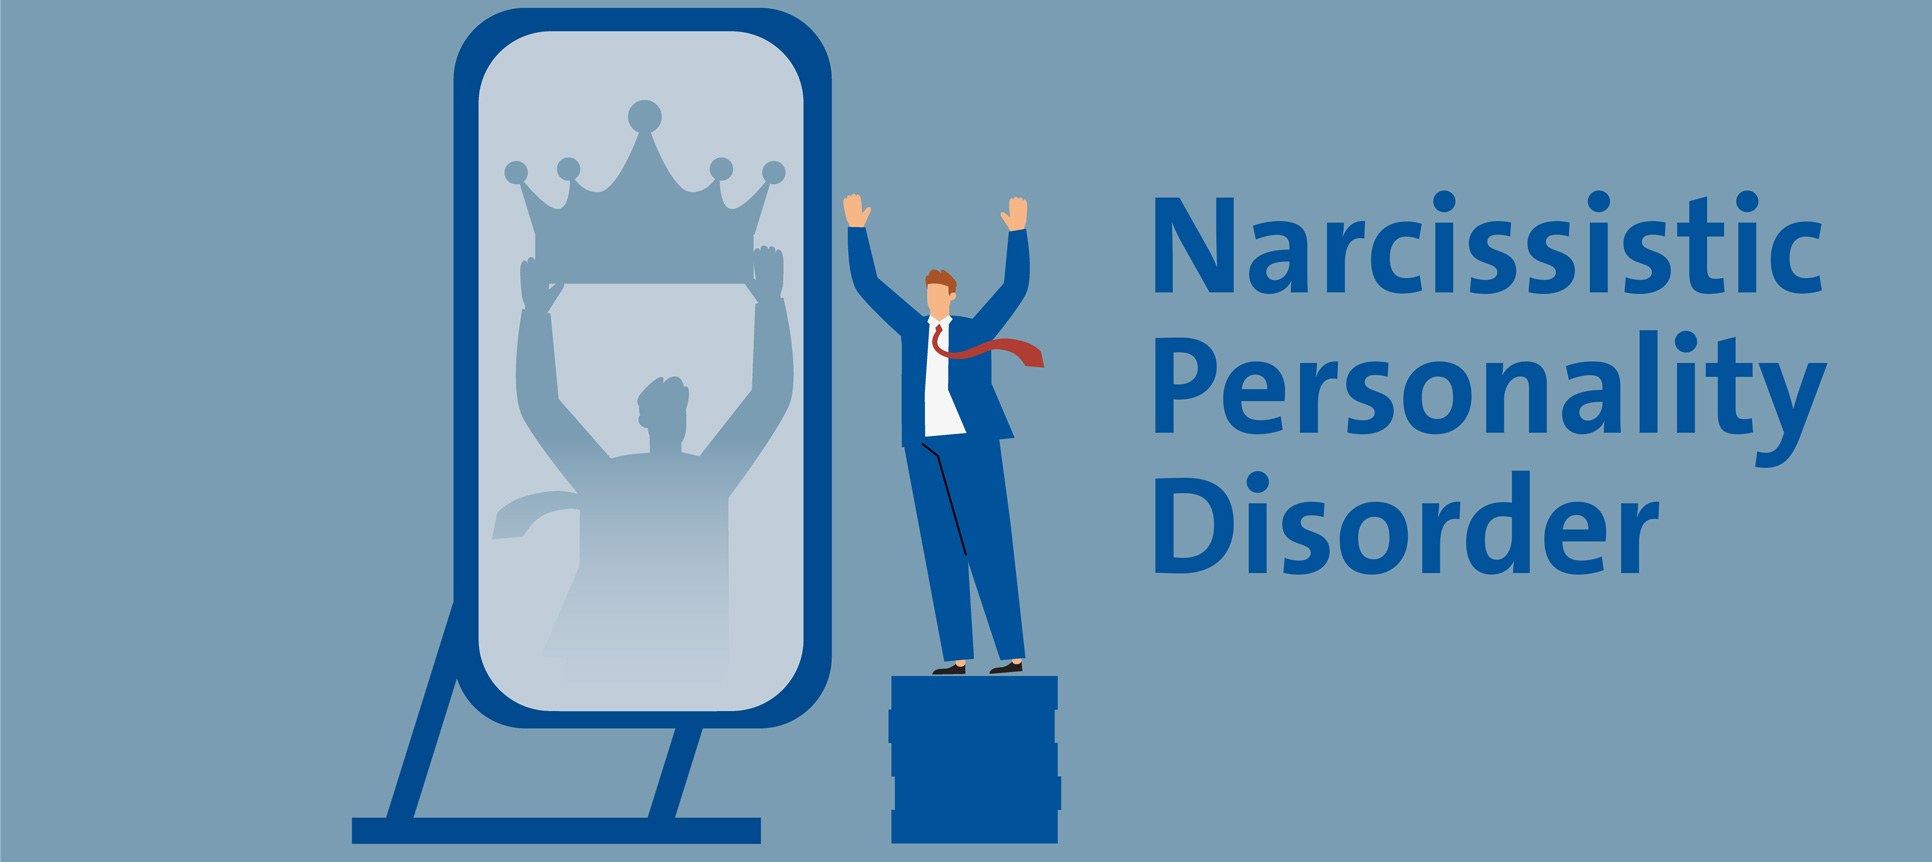 understanding narcissistic personality disorder